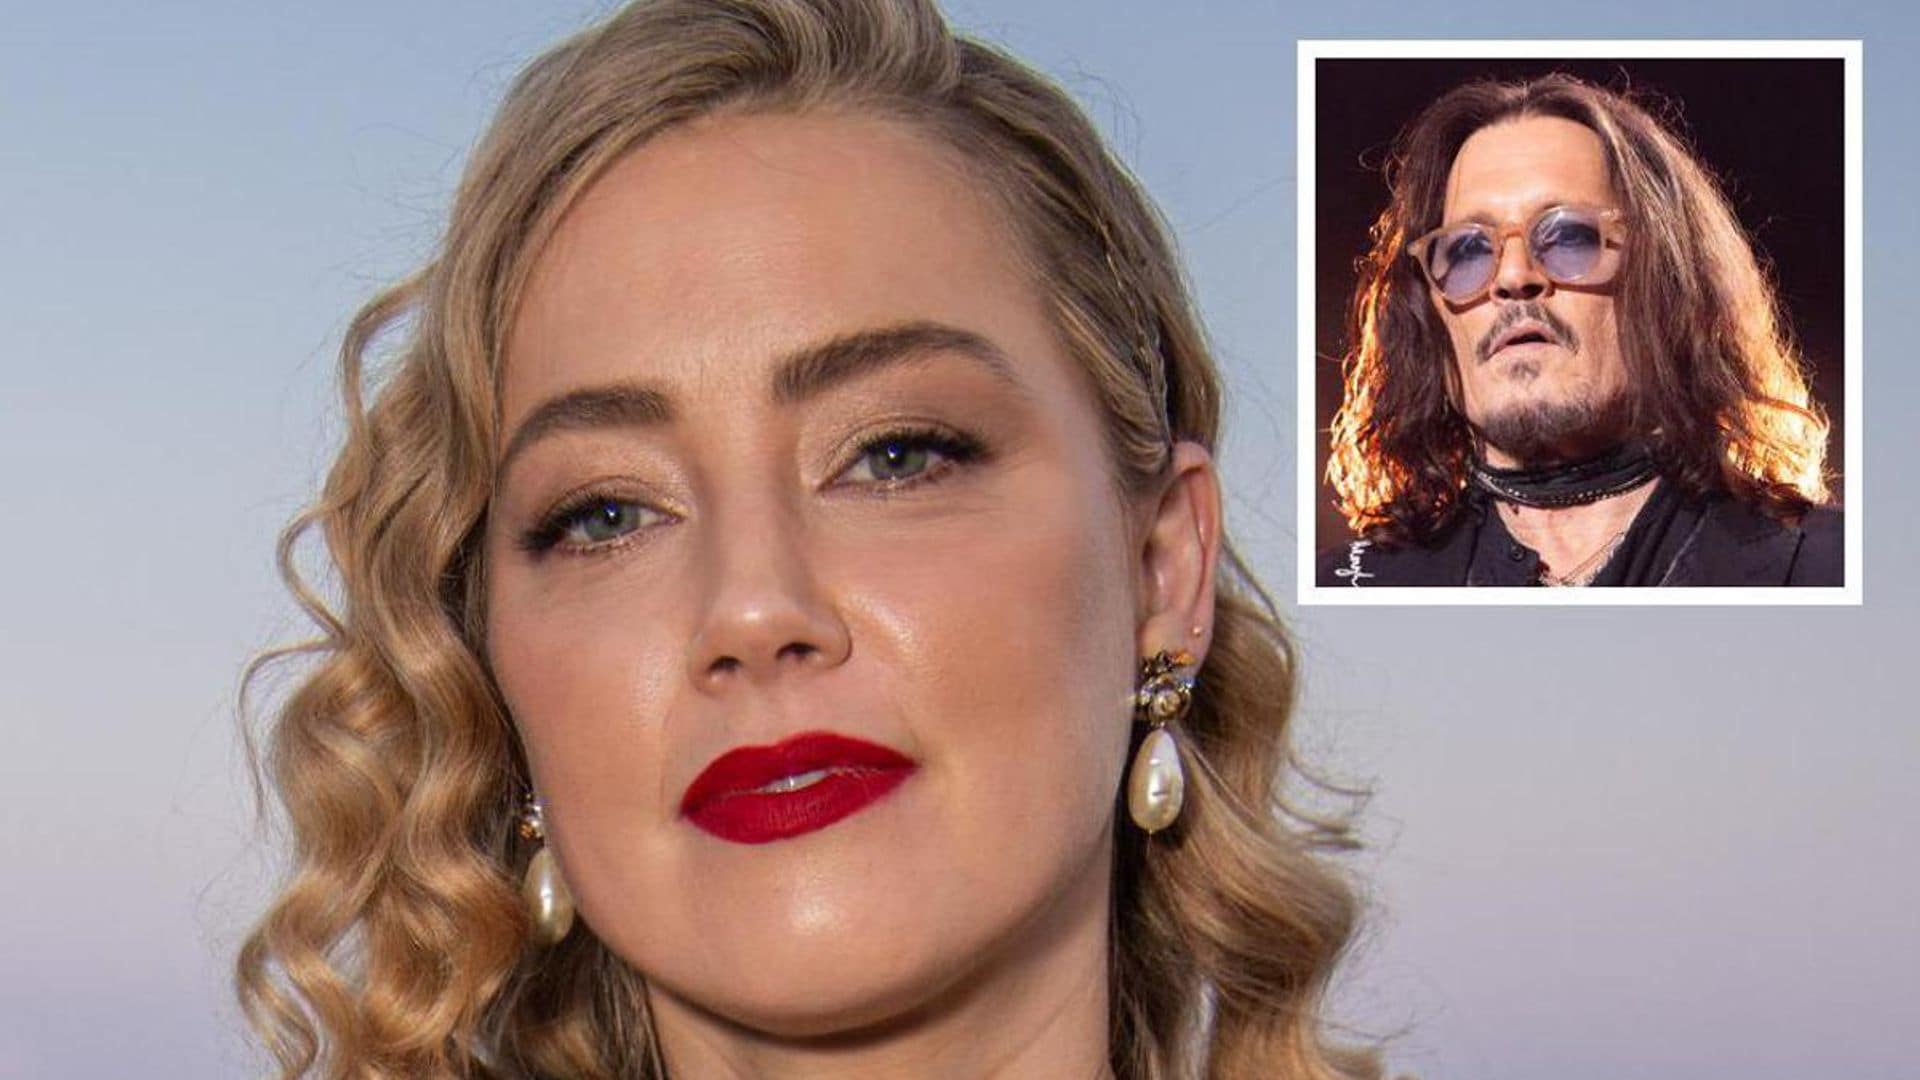 Amber Heard’s In the Fire director says she has ‘moved on’ from the Johnny Depp trial